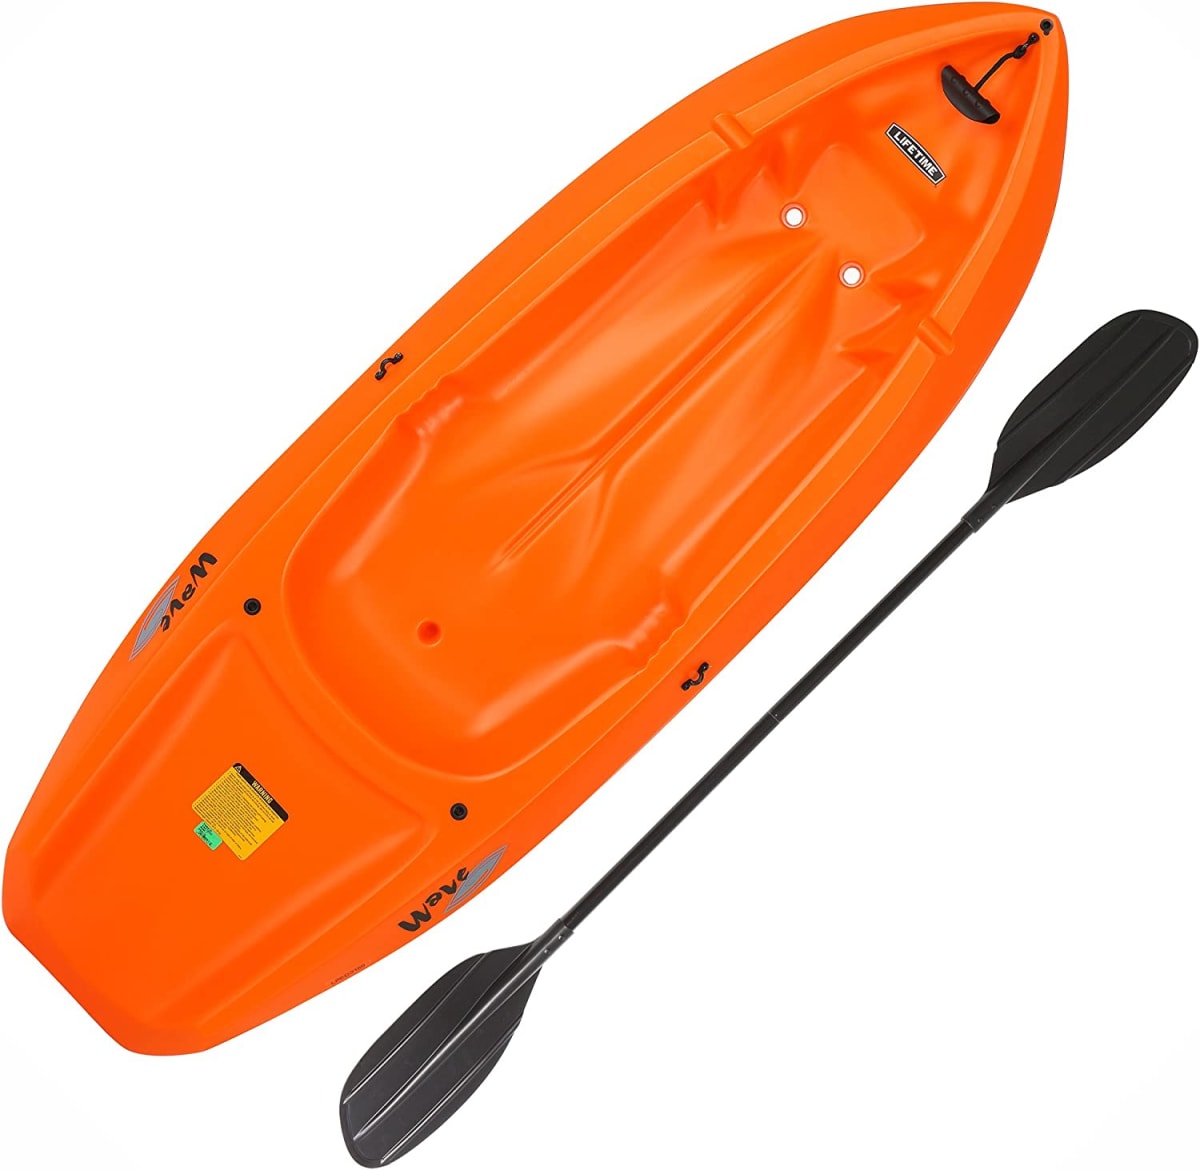 90479 Youth 6 Feet Wave Kayak with Paddle